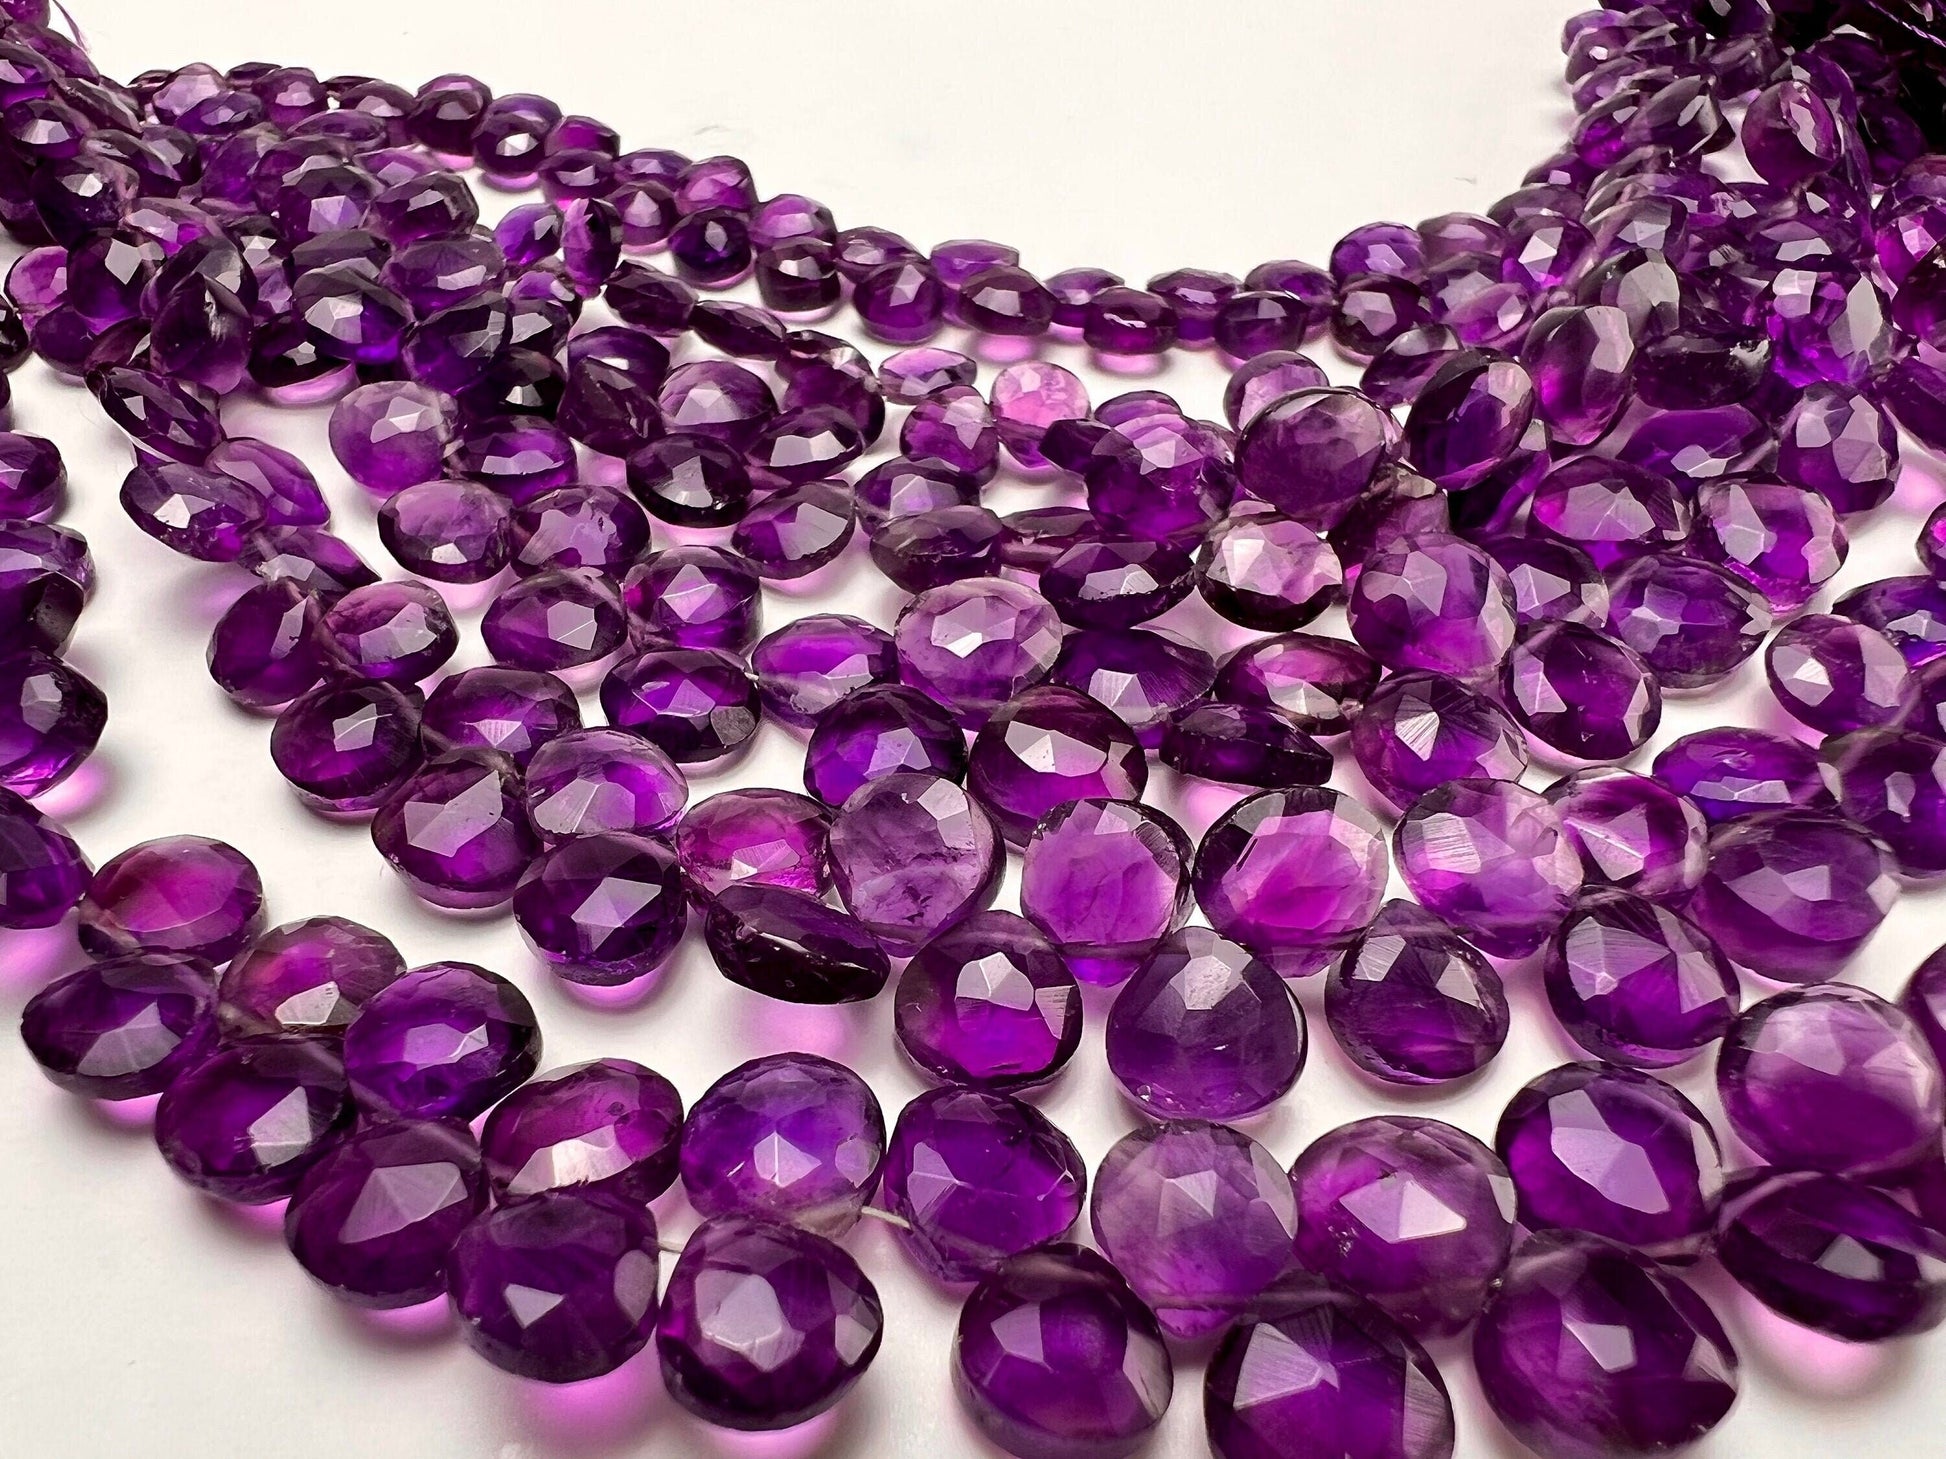 Natural Amethyst Faceted heart 5-7mm drop for Jewelry Making DIY Gemstone Beads . 10, 20, 30 pcs